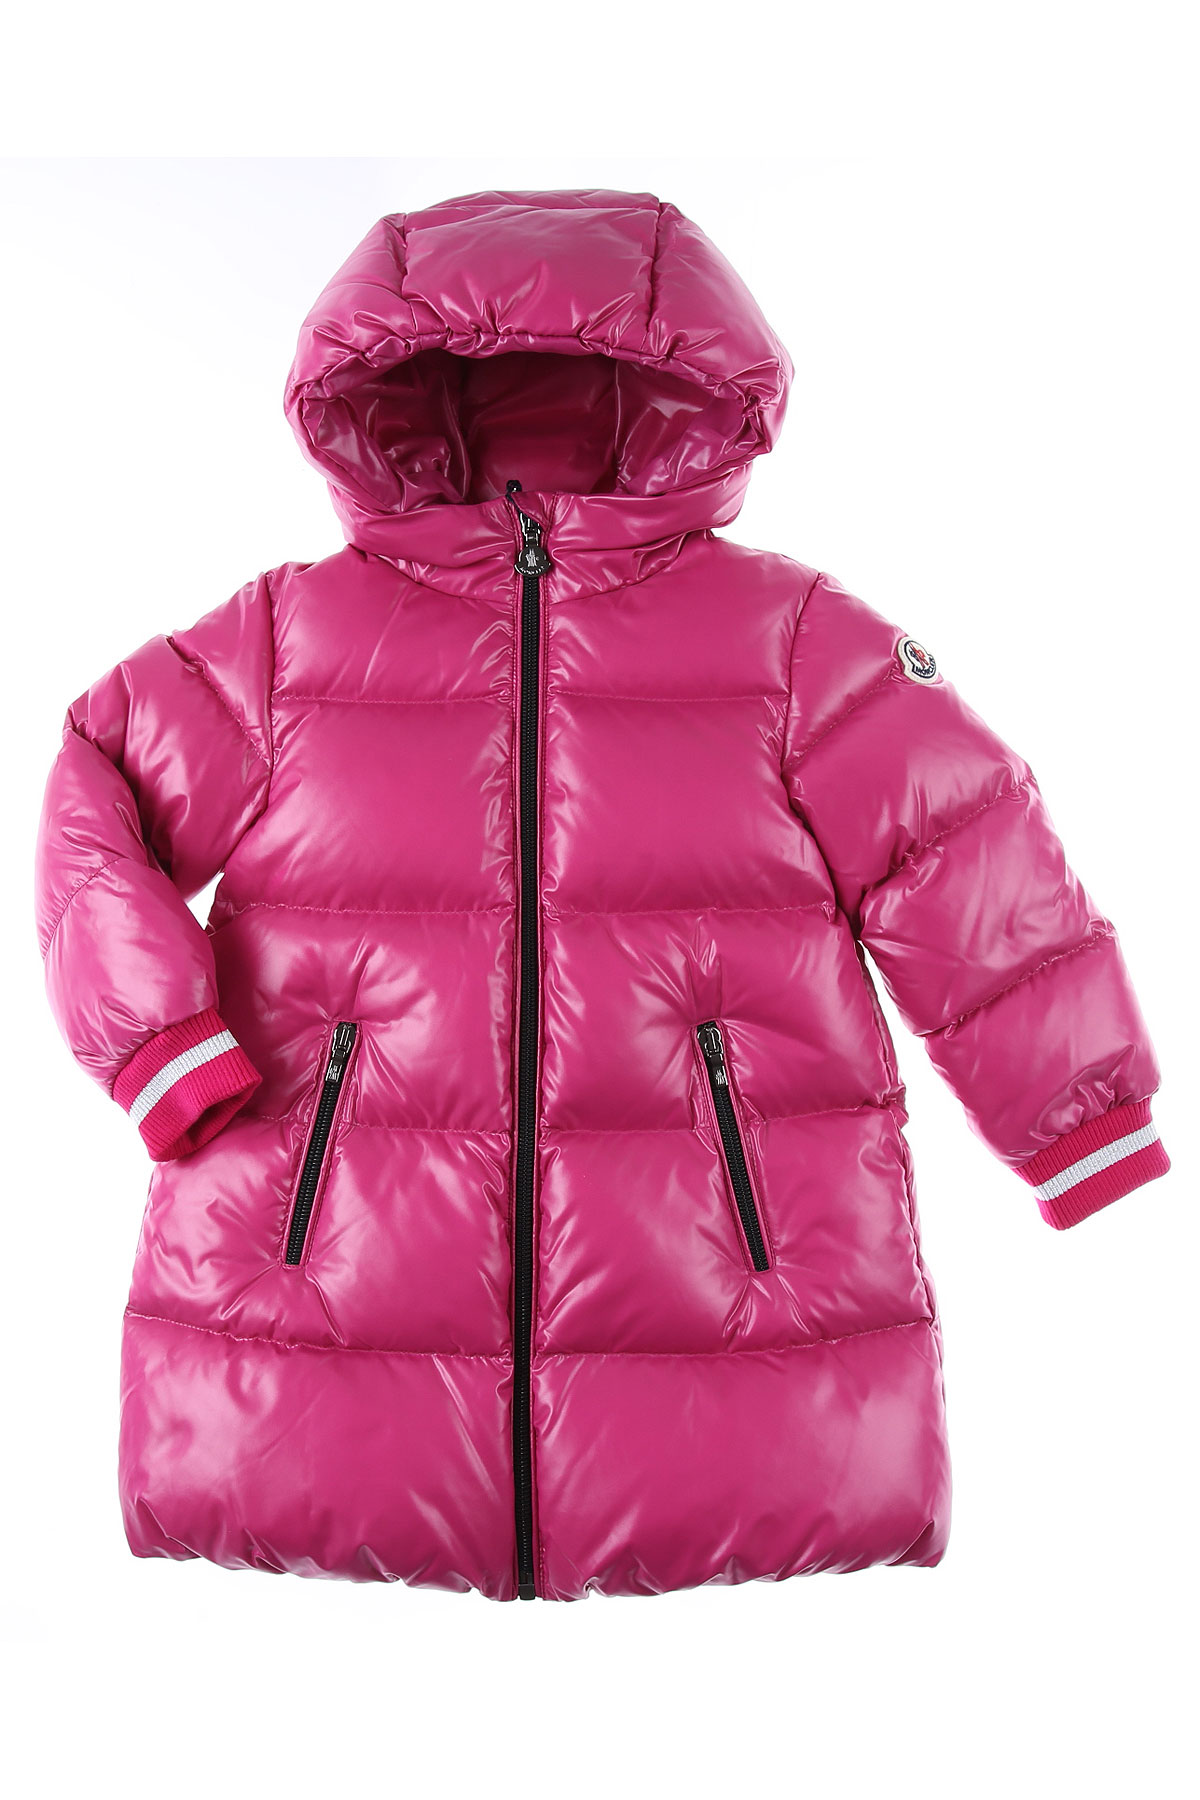 Baby Girl Clothing Moncler, Style code: 4996405-68950-550